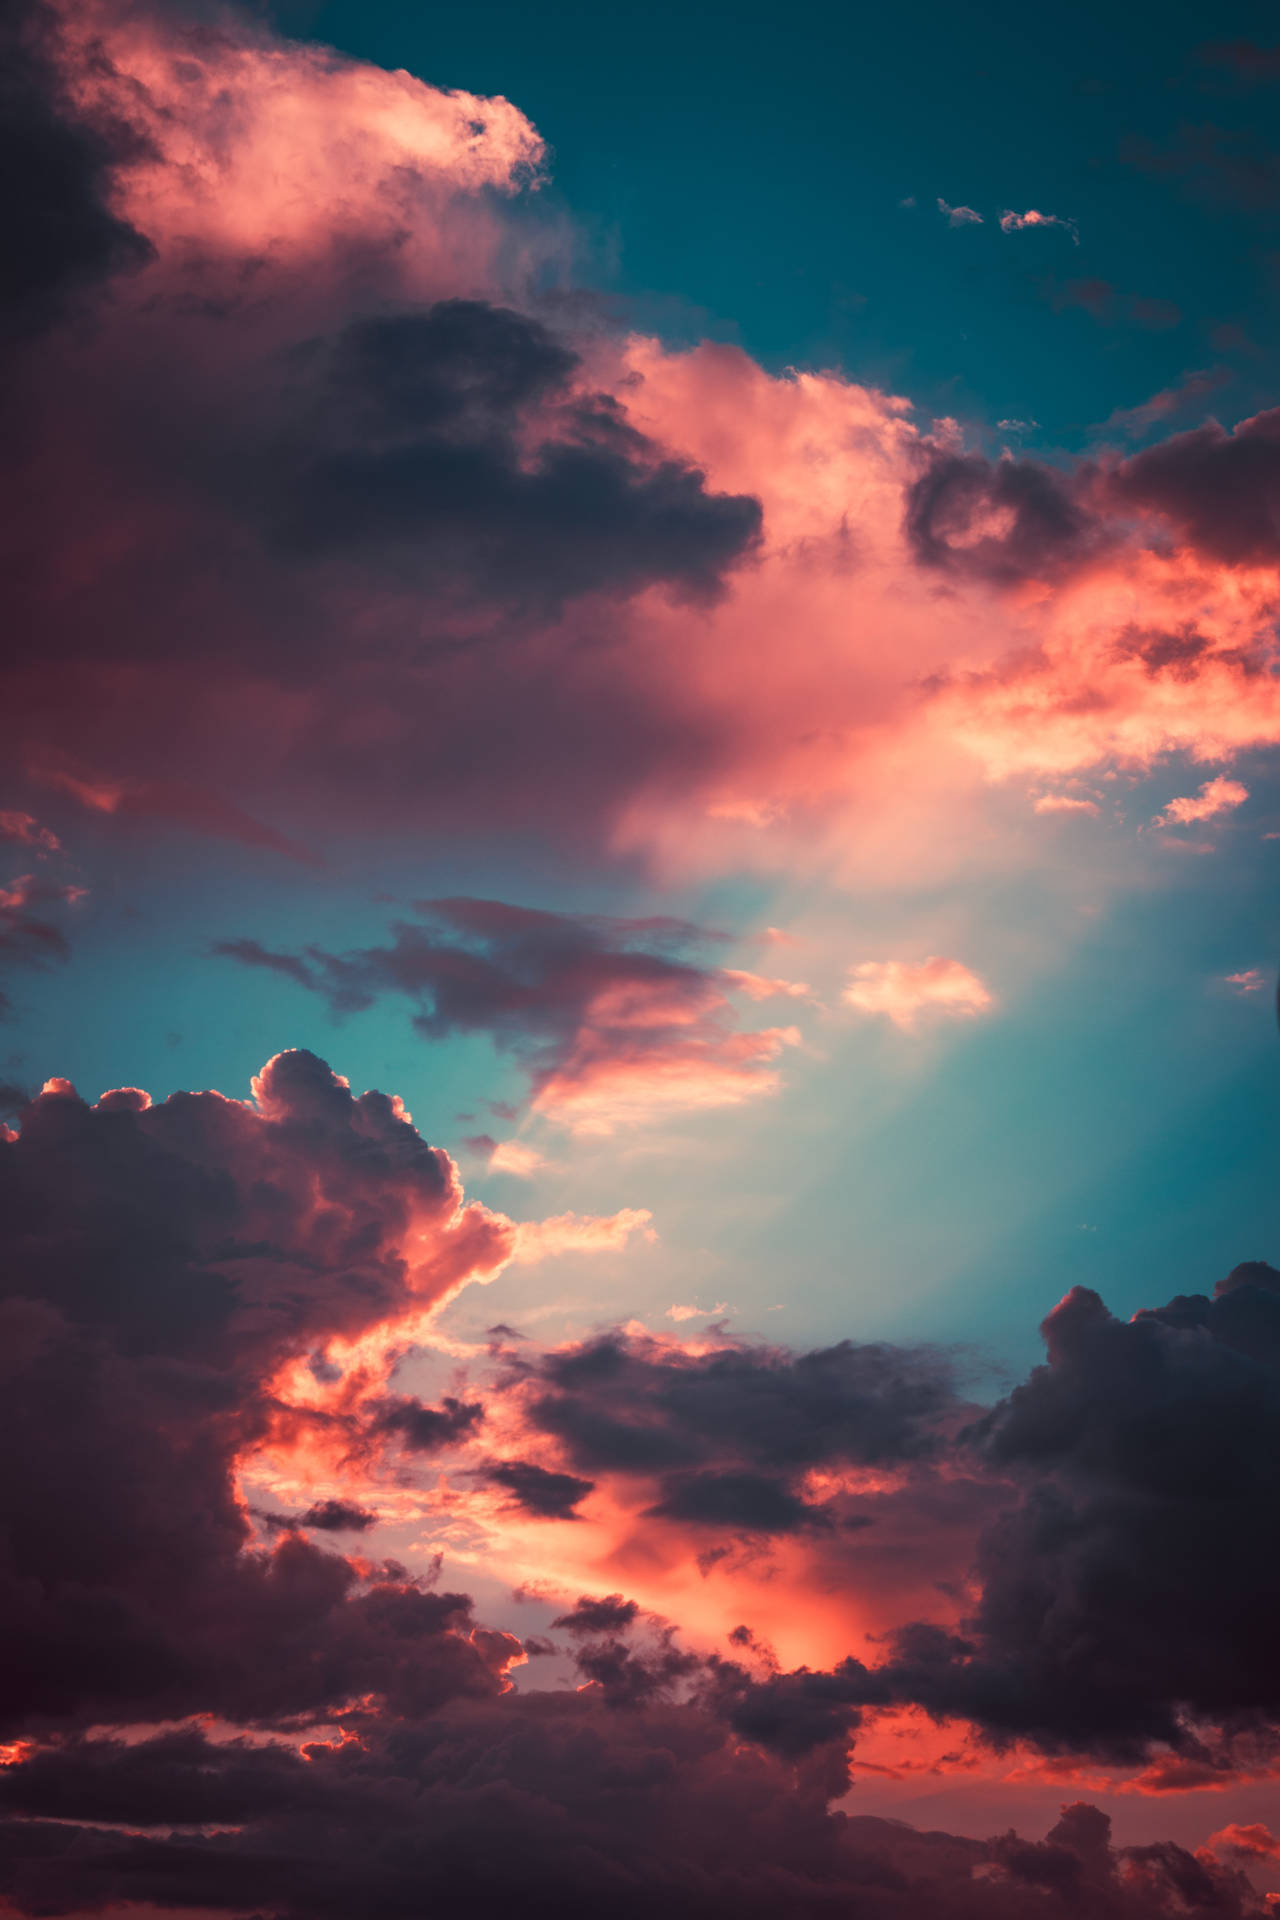 Top 999+ Vintage Aesthetic Clouds Wallpaper Full HD, 4K Free to Use